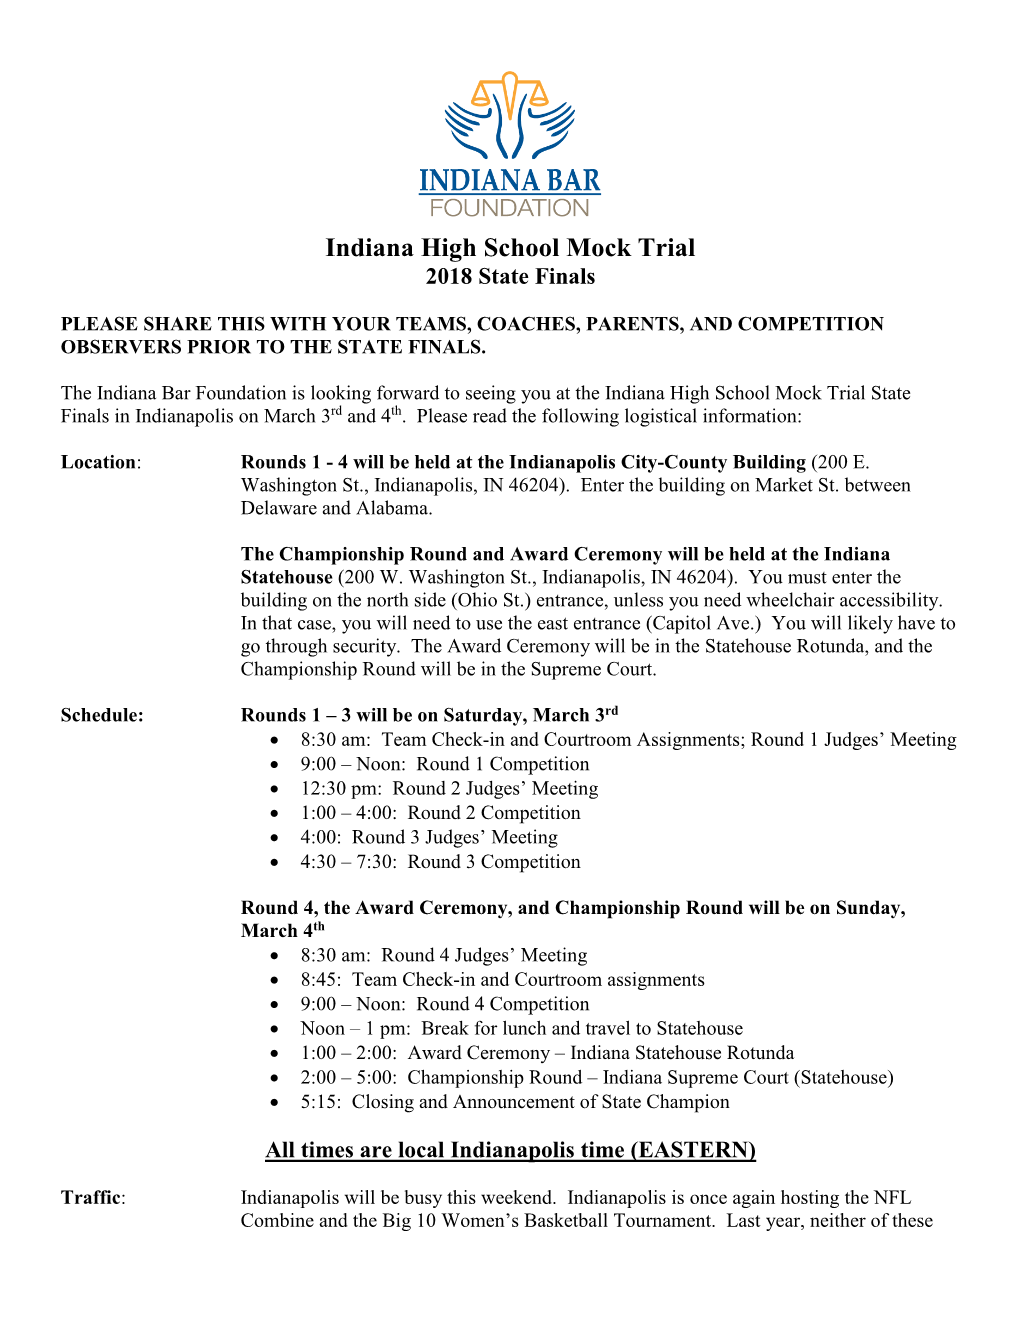 Indiana High School Mock Trial 2018 State Finals